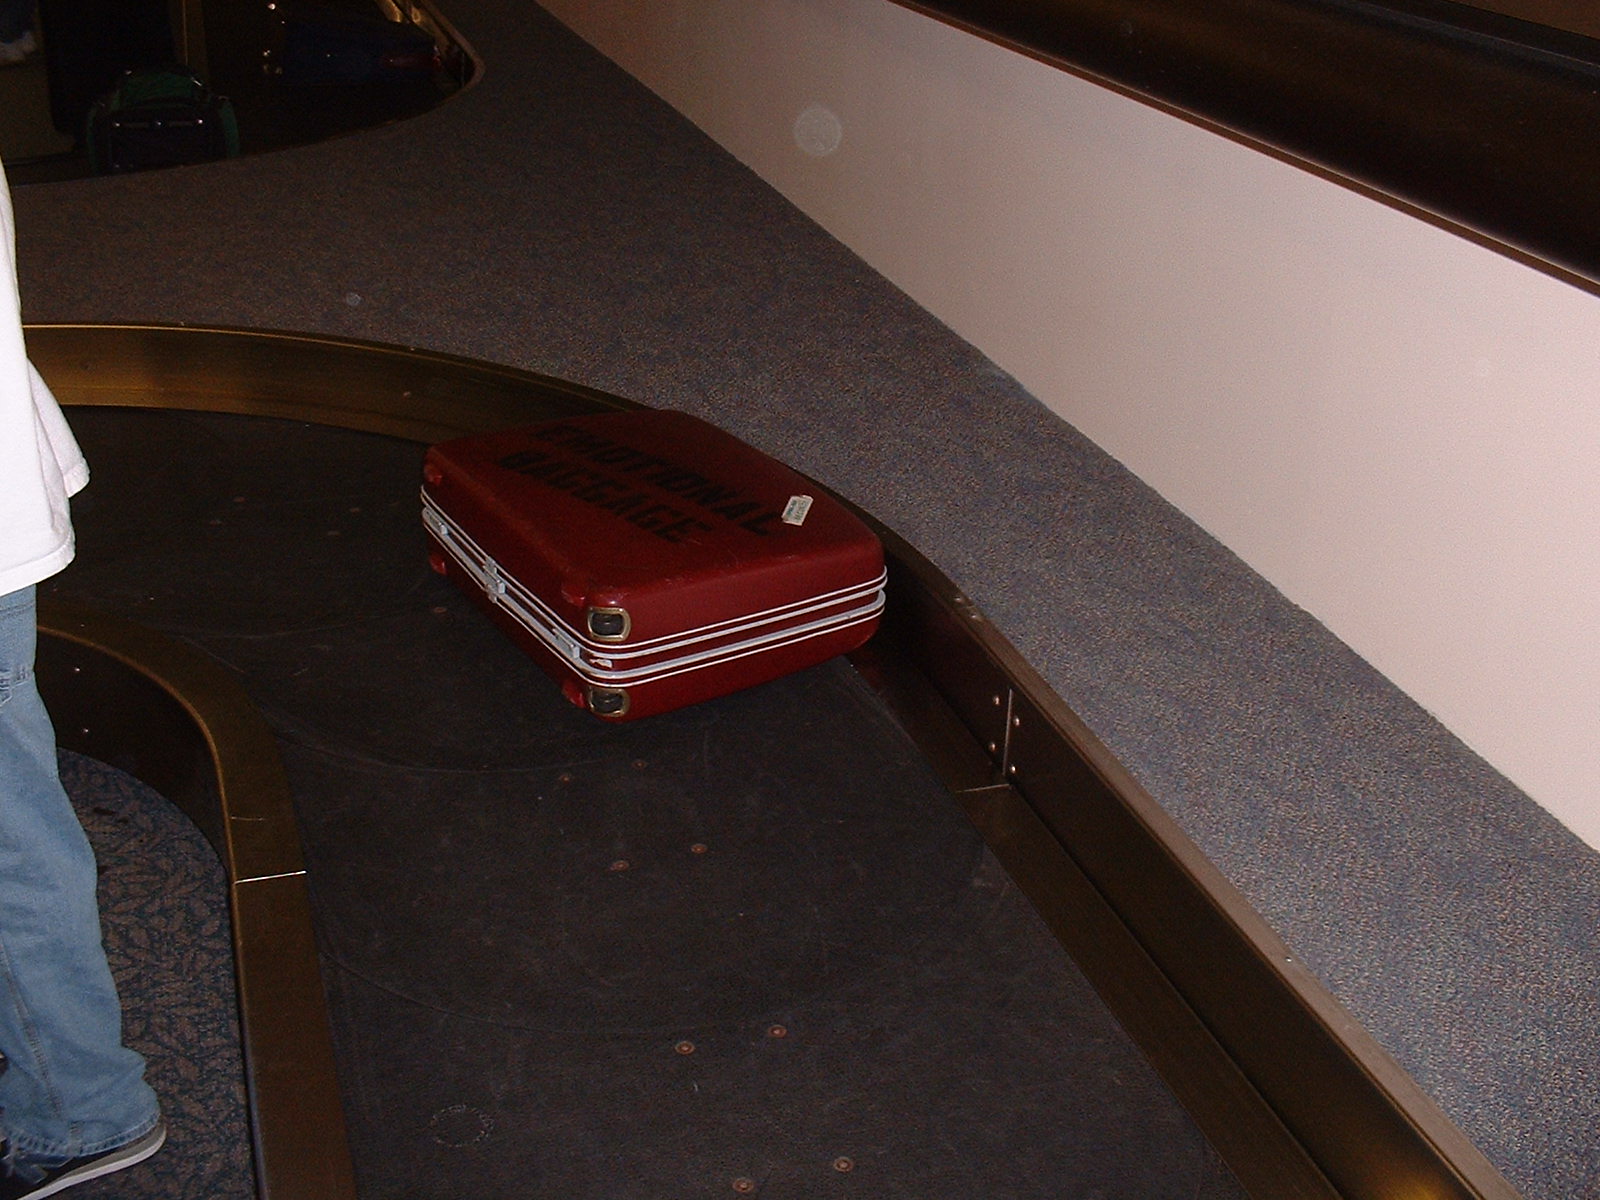 Image: Retro red suitcase with 'Emotional Baggage' stenciled on side on conveyor belt.